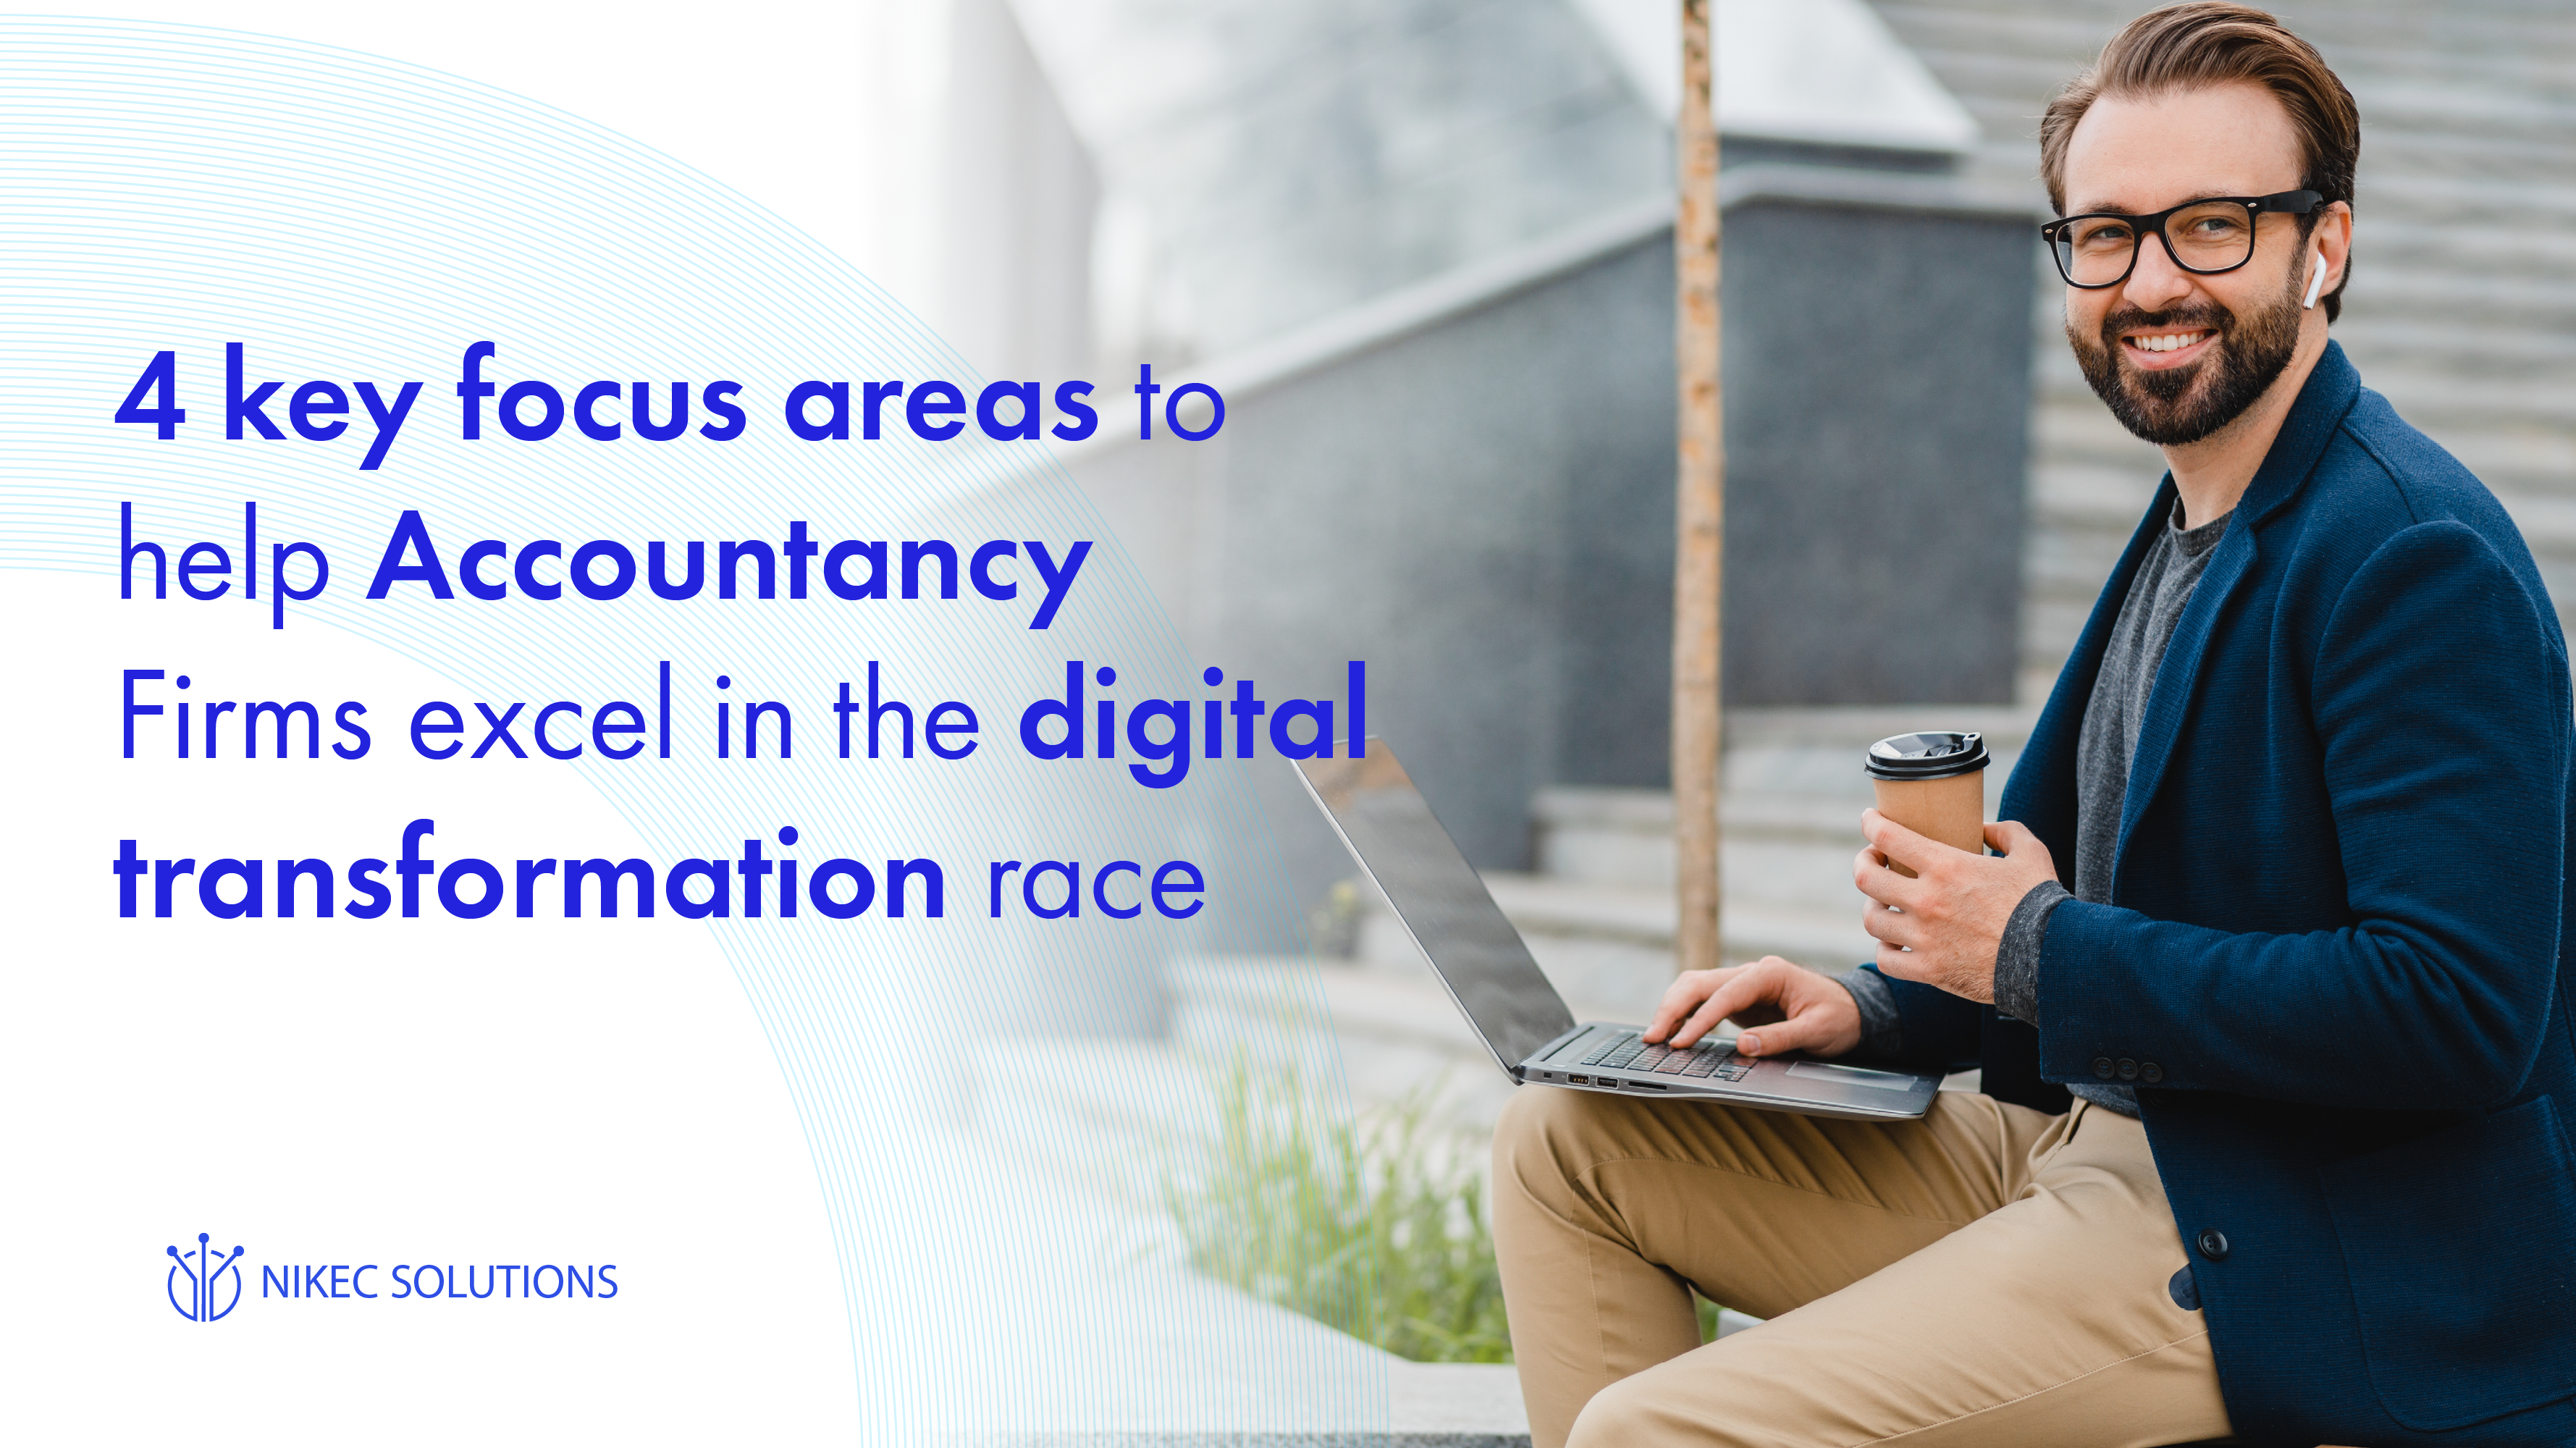 4 key focus areas to help accountancy firms excel in the digital transformation race